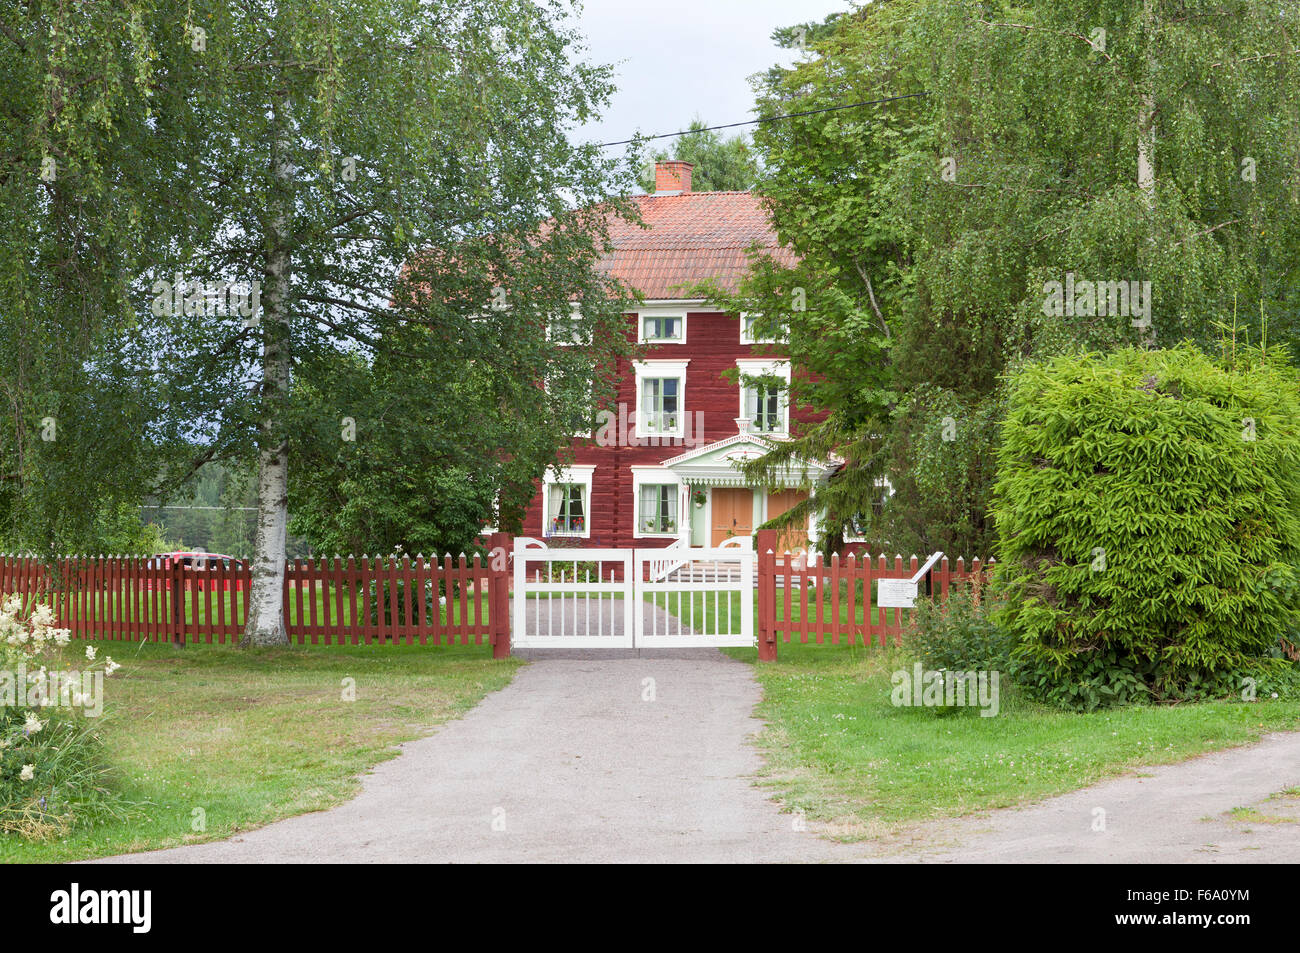 HALSINGLAND, SWEDEN ON JULY 23, 2015. View of a beautiful wooden homestead. UNESCO World Heritage Site. Entrance. Editorial use. Stock Photo